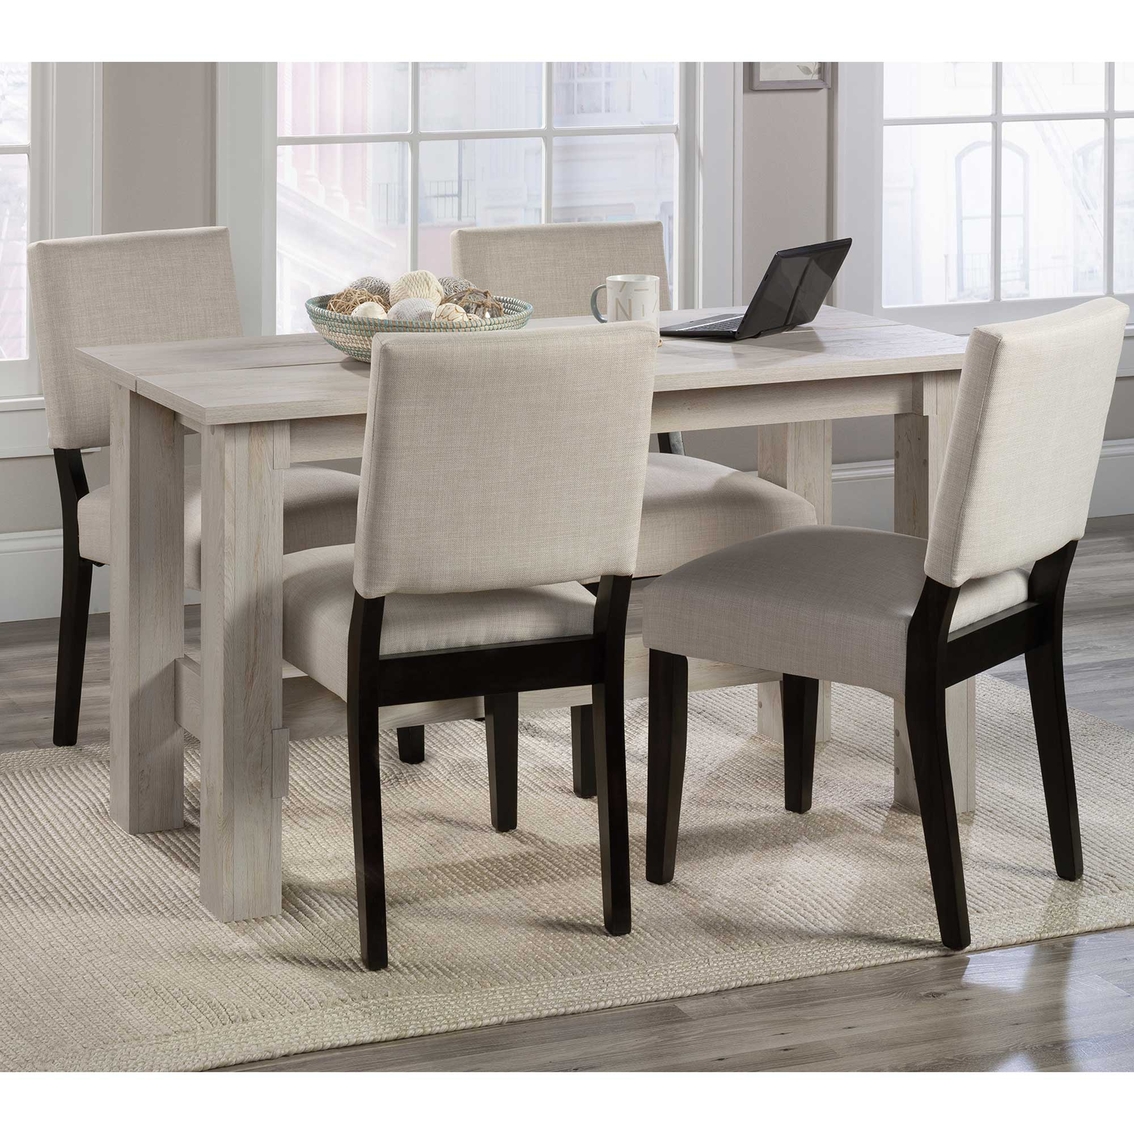 Sauder Boone Mountain Kitchen Dining Room Table - Image 3 of 8